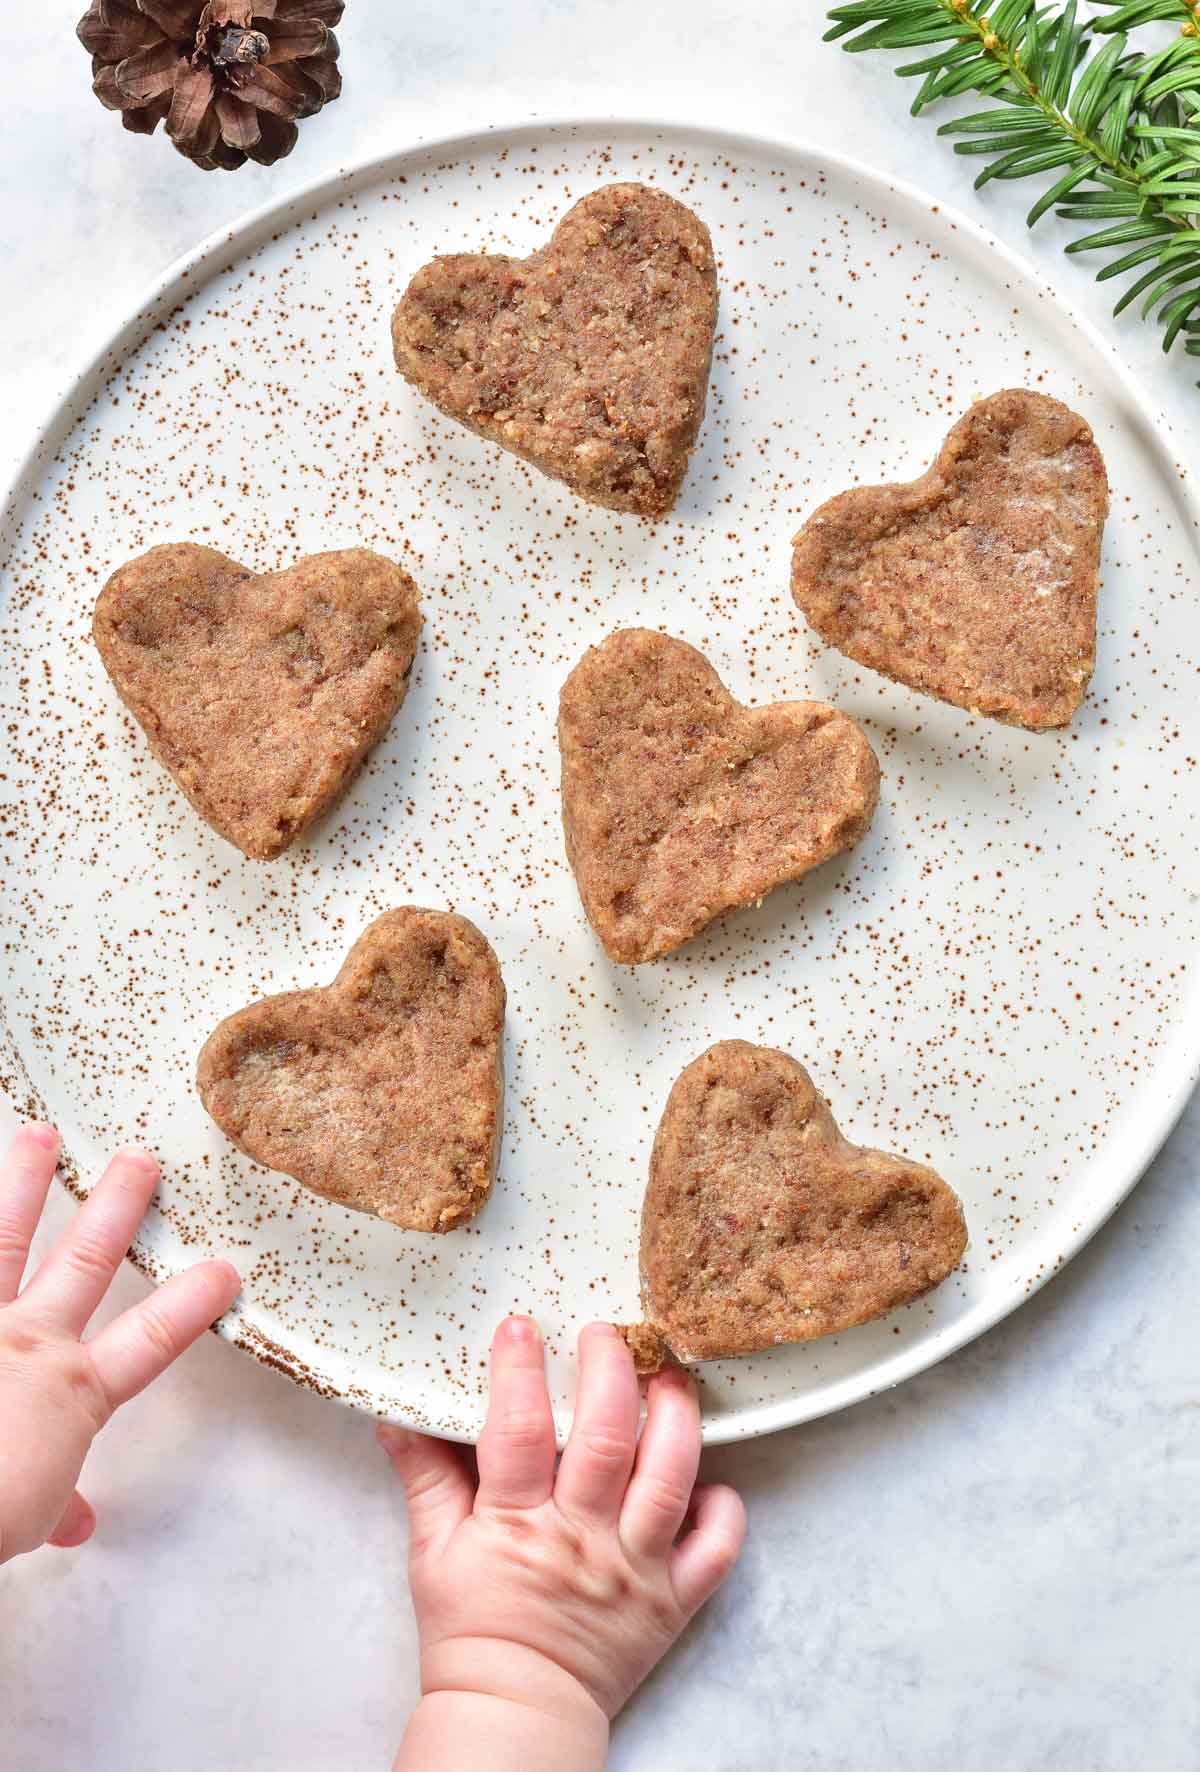 heart-shaped soft gingerbread cookies for babies on a white plate, baby hands reaching for cookie